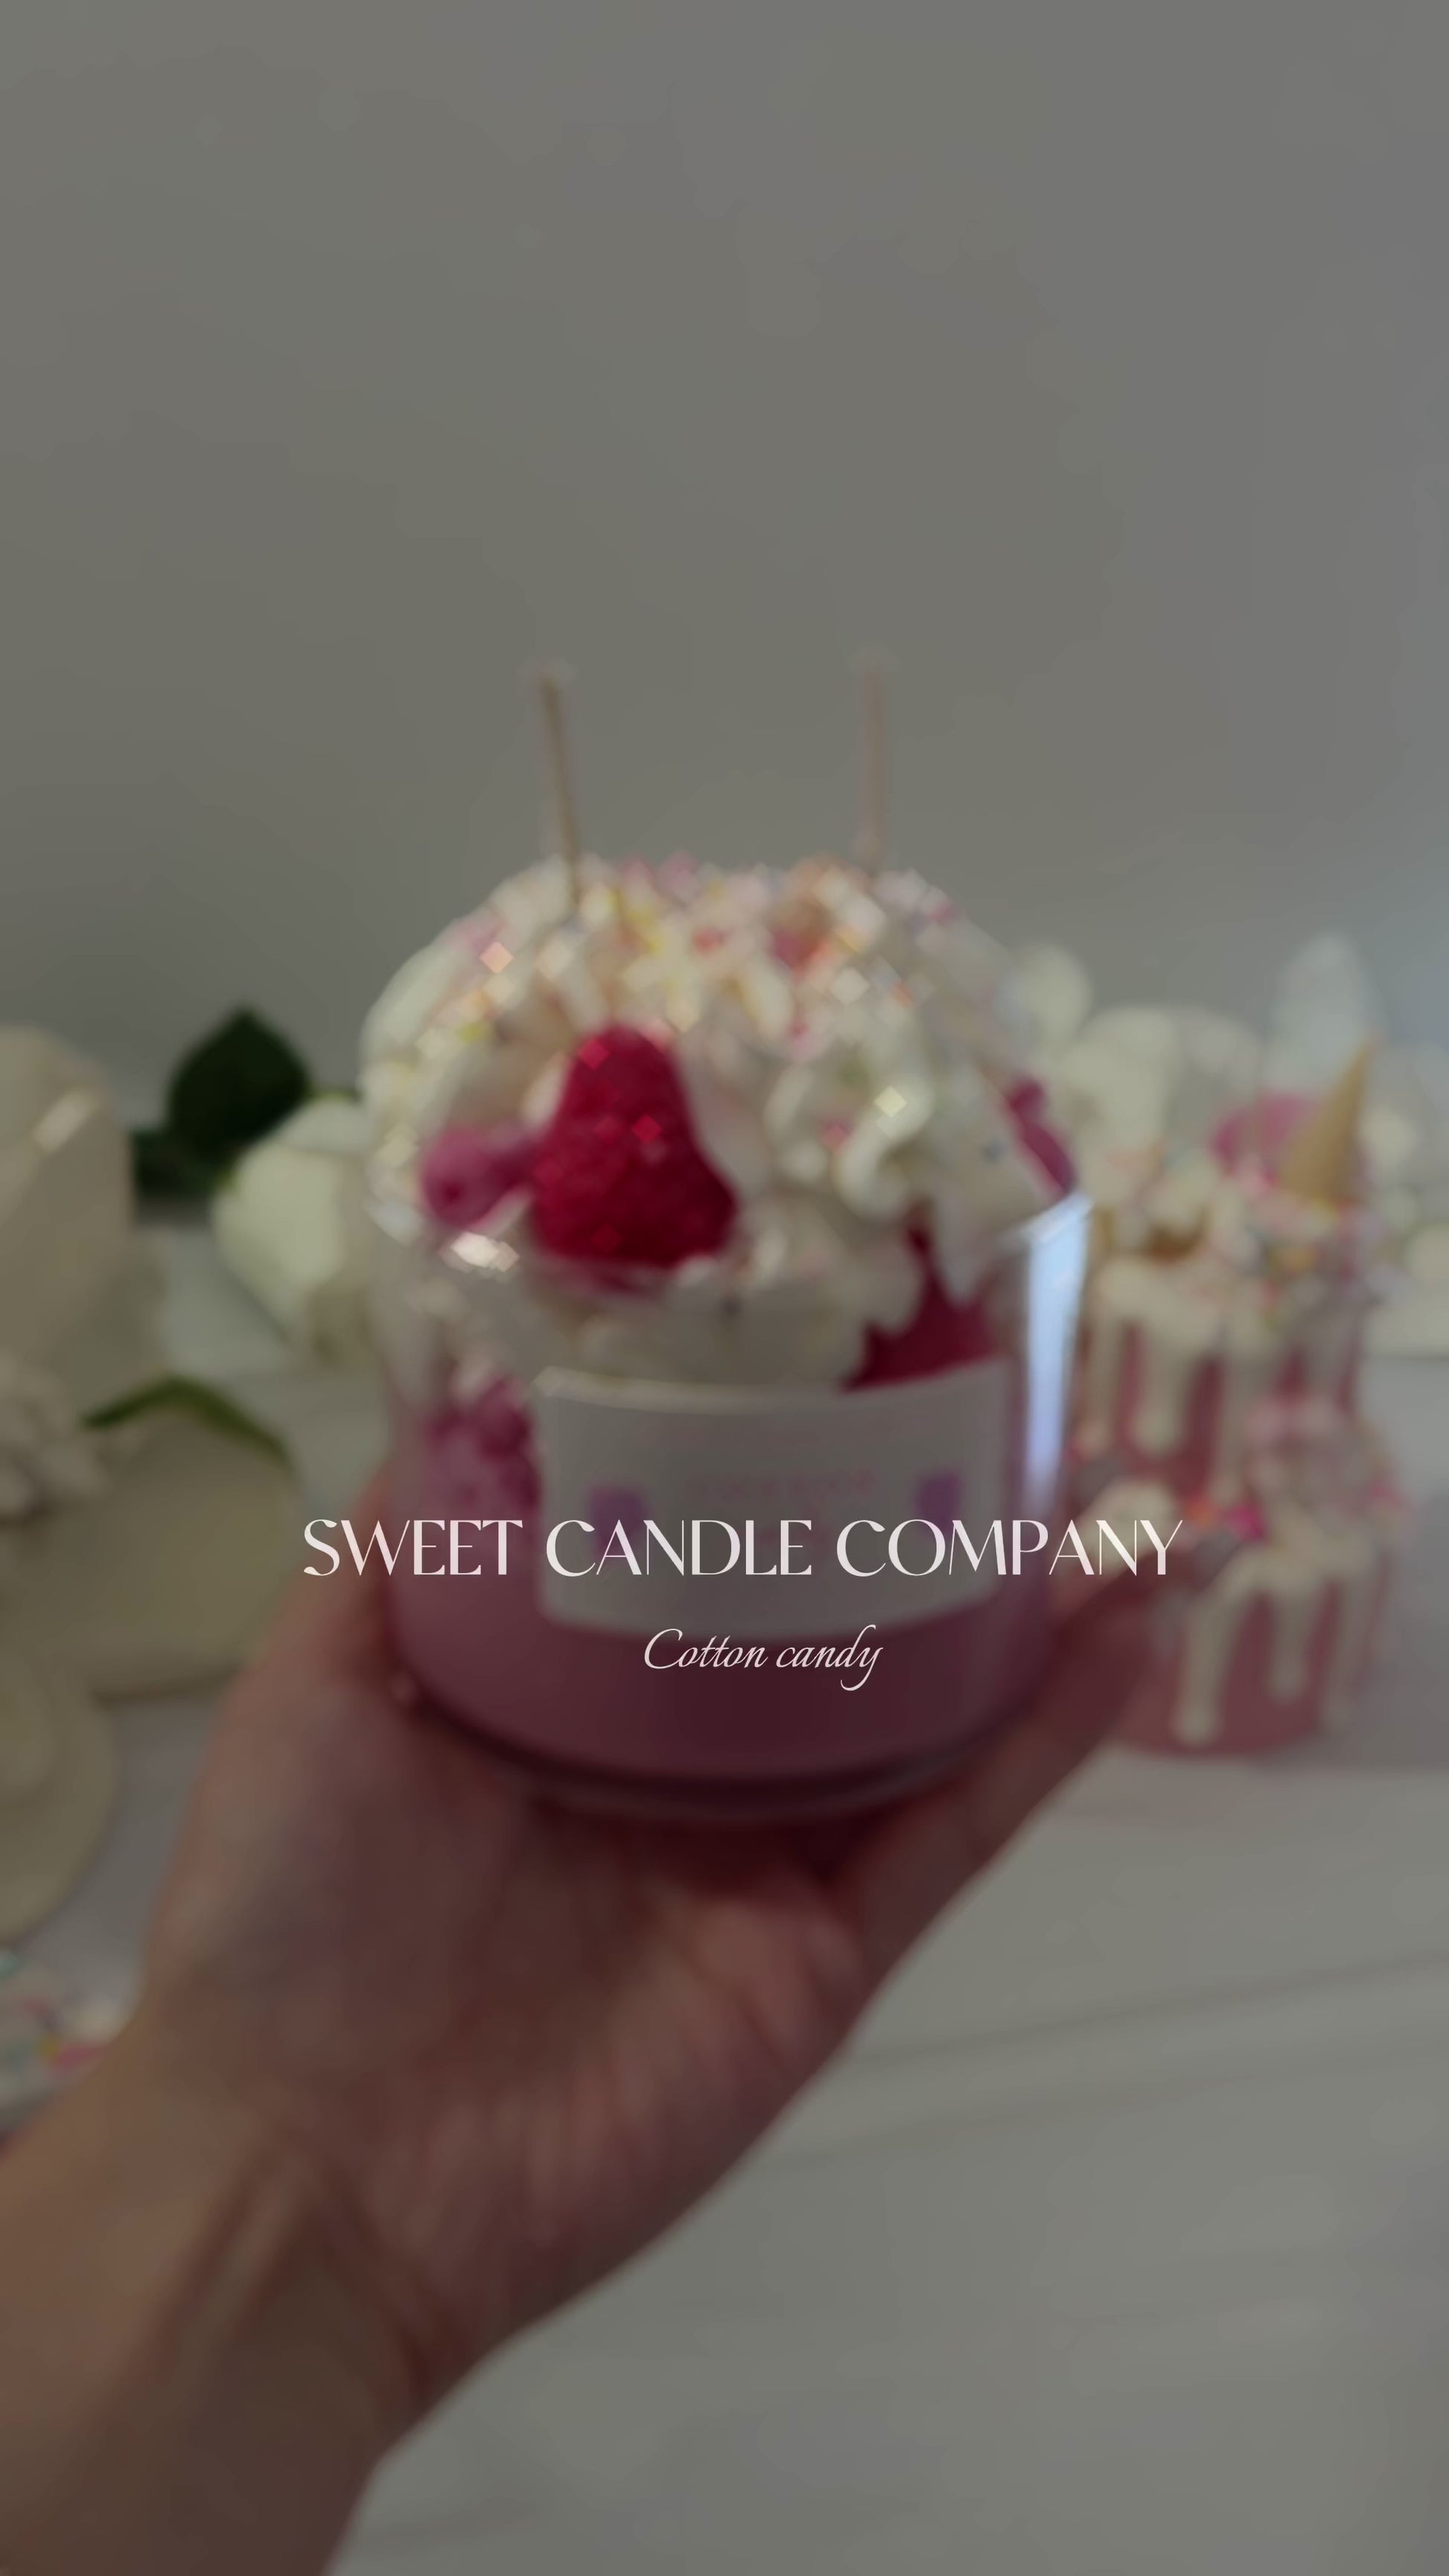 Sweet Candle Company - Cotton Candy Dessert Candle – SWEET CANDLE